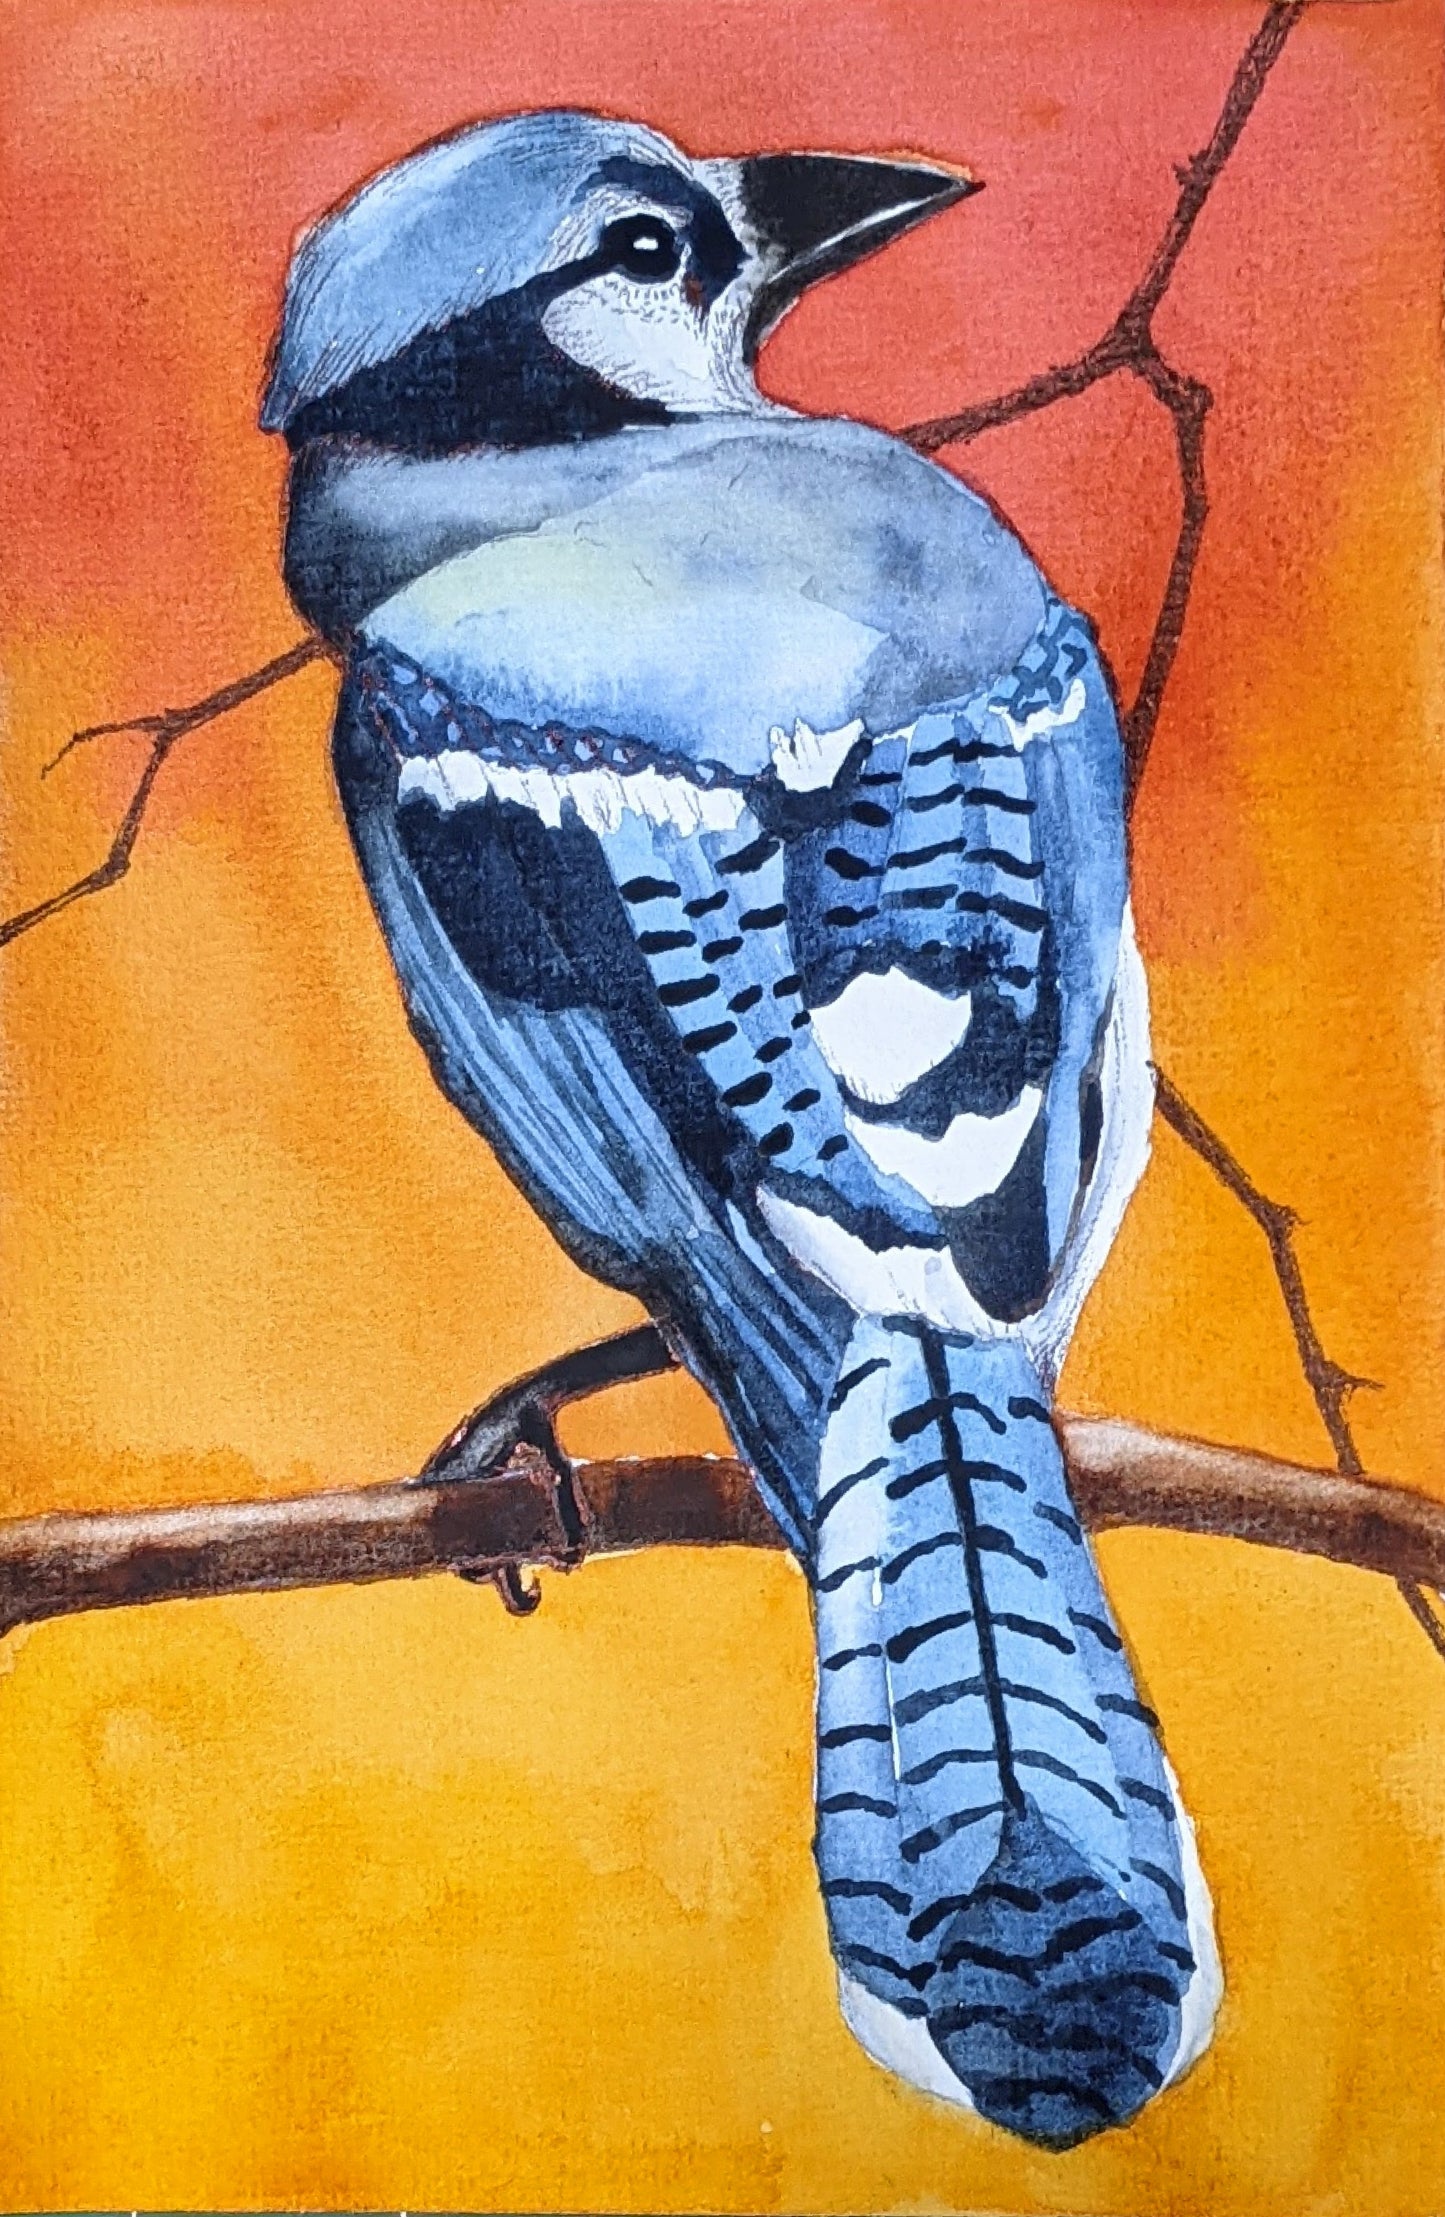 Blue Jay at Sunset watercolor painting on paper